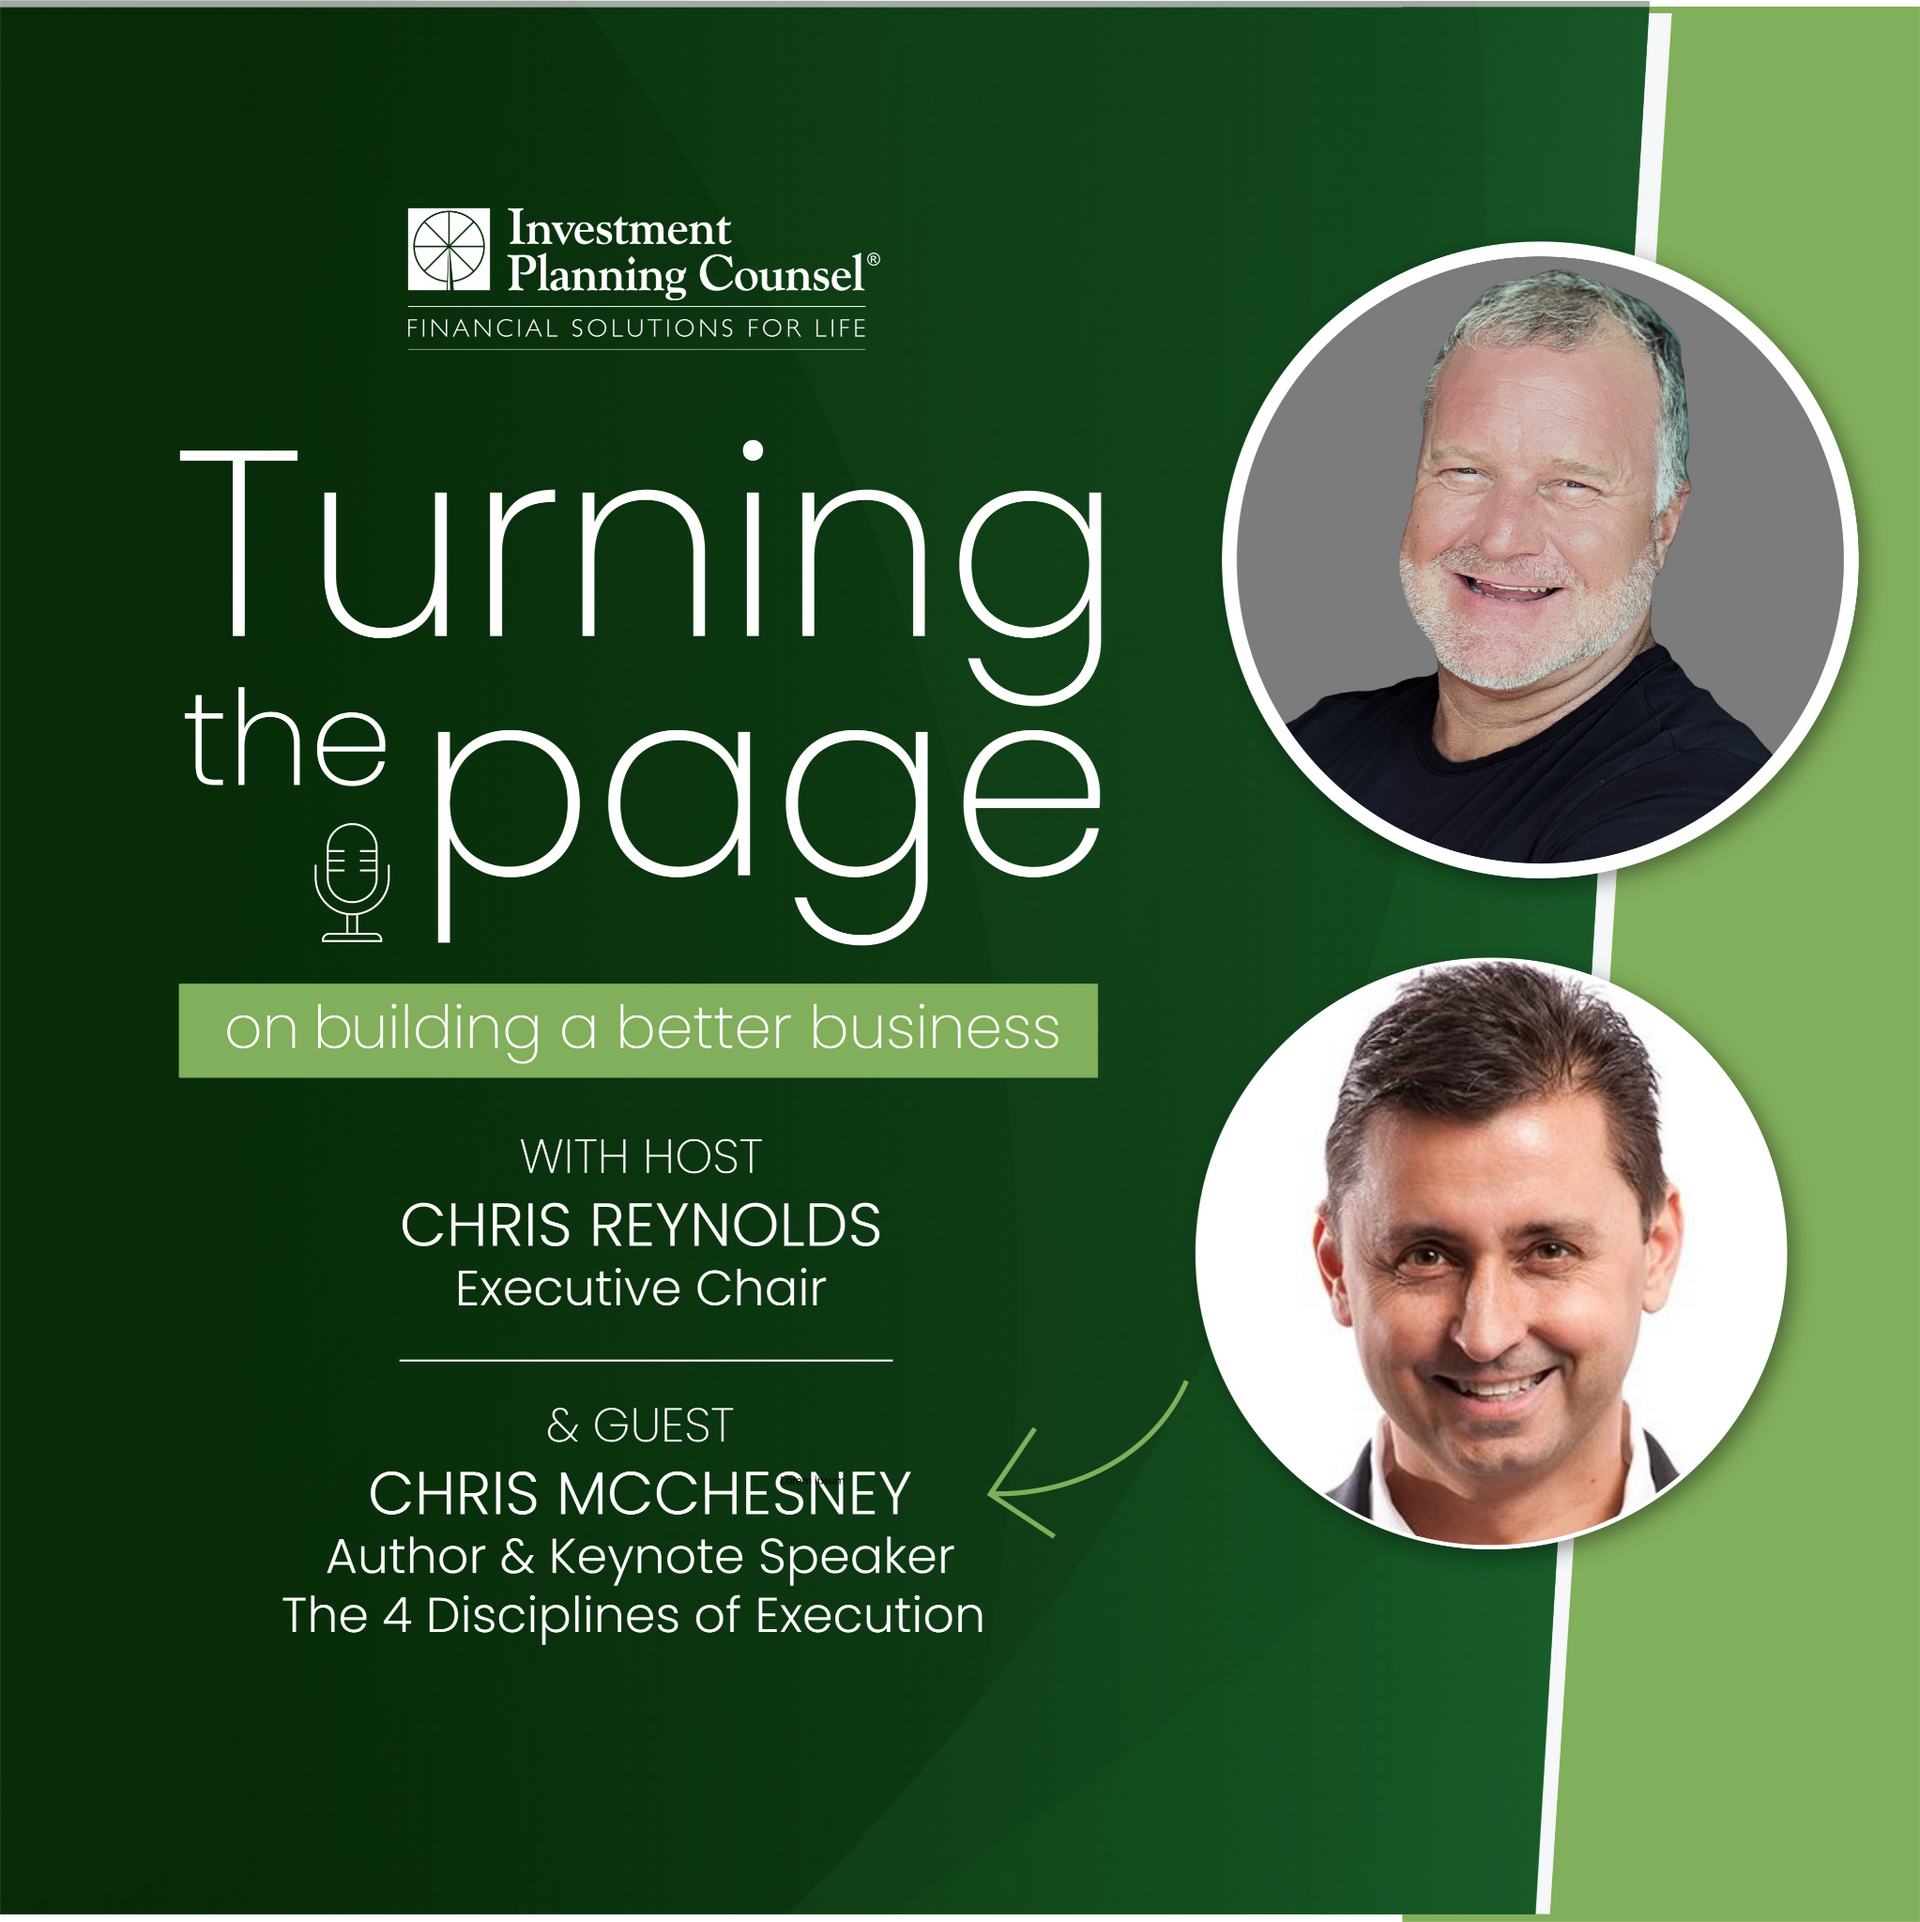 Turning the page Pocast episode card with Chris McChesney